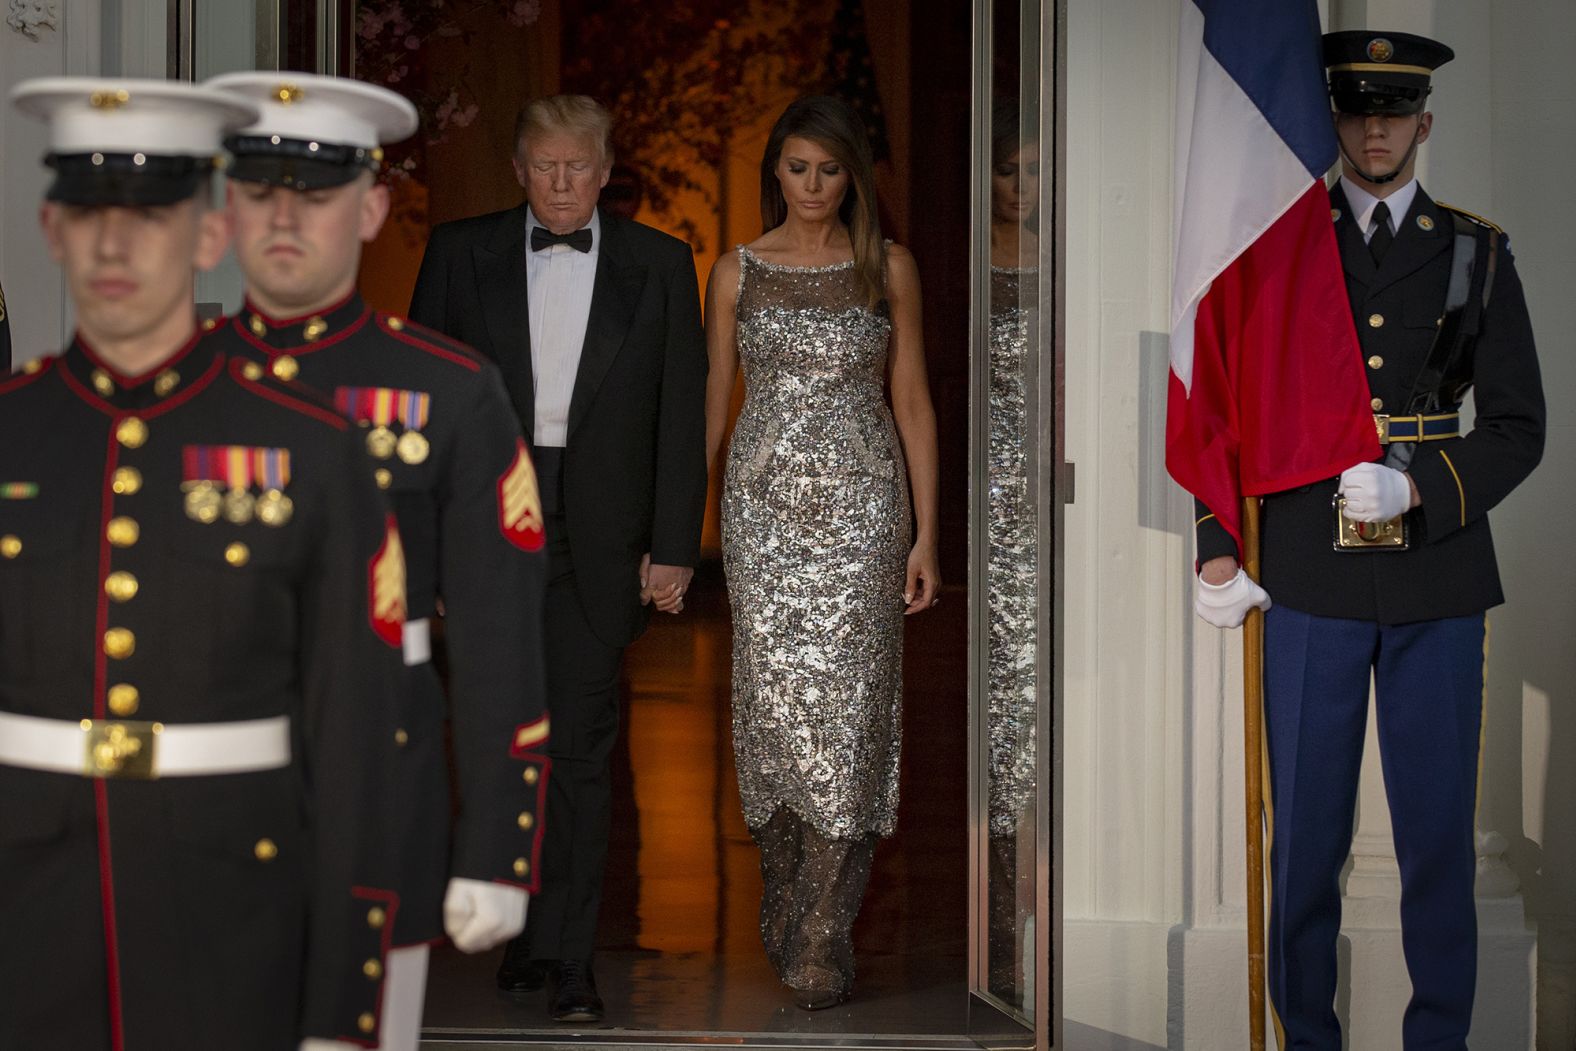 The President and first lady Melania Trump arrive to greet French President Emmanuel Macron and his wife, Brigitte, ahead of <a href="https://www.cnn.com/2018/04/23/politics/white-house-state-dinner-macron-trump/index.html" target="_blank">a state dinner at the White House</a> on April 24. It was the first official state visit of Trump's presidency.